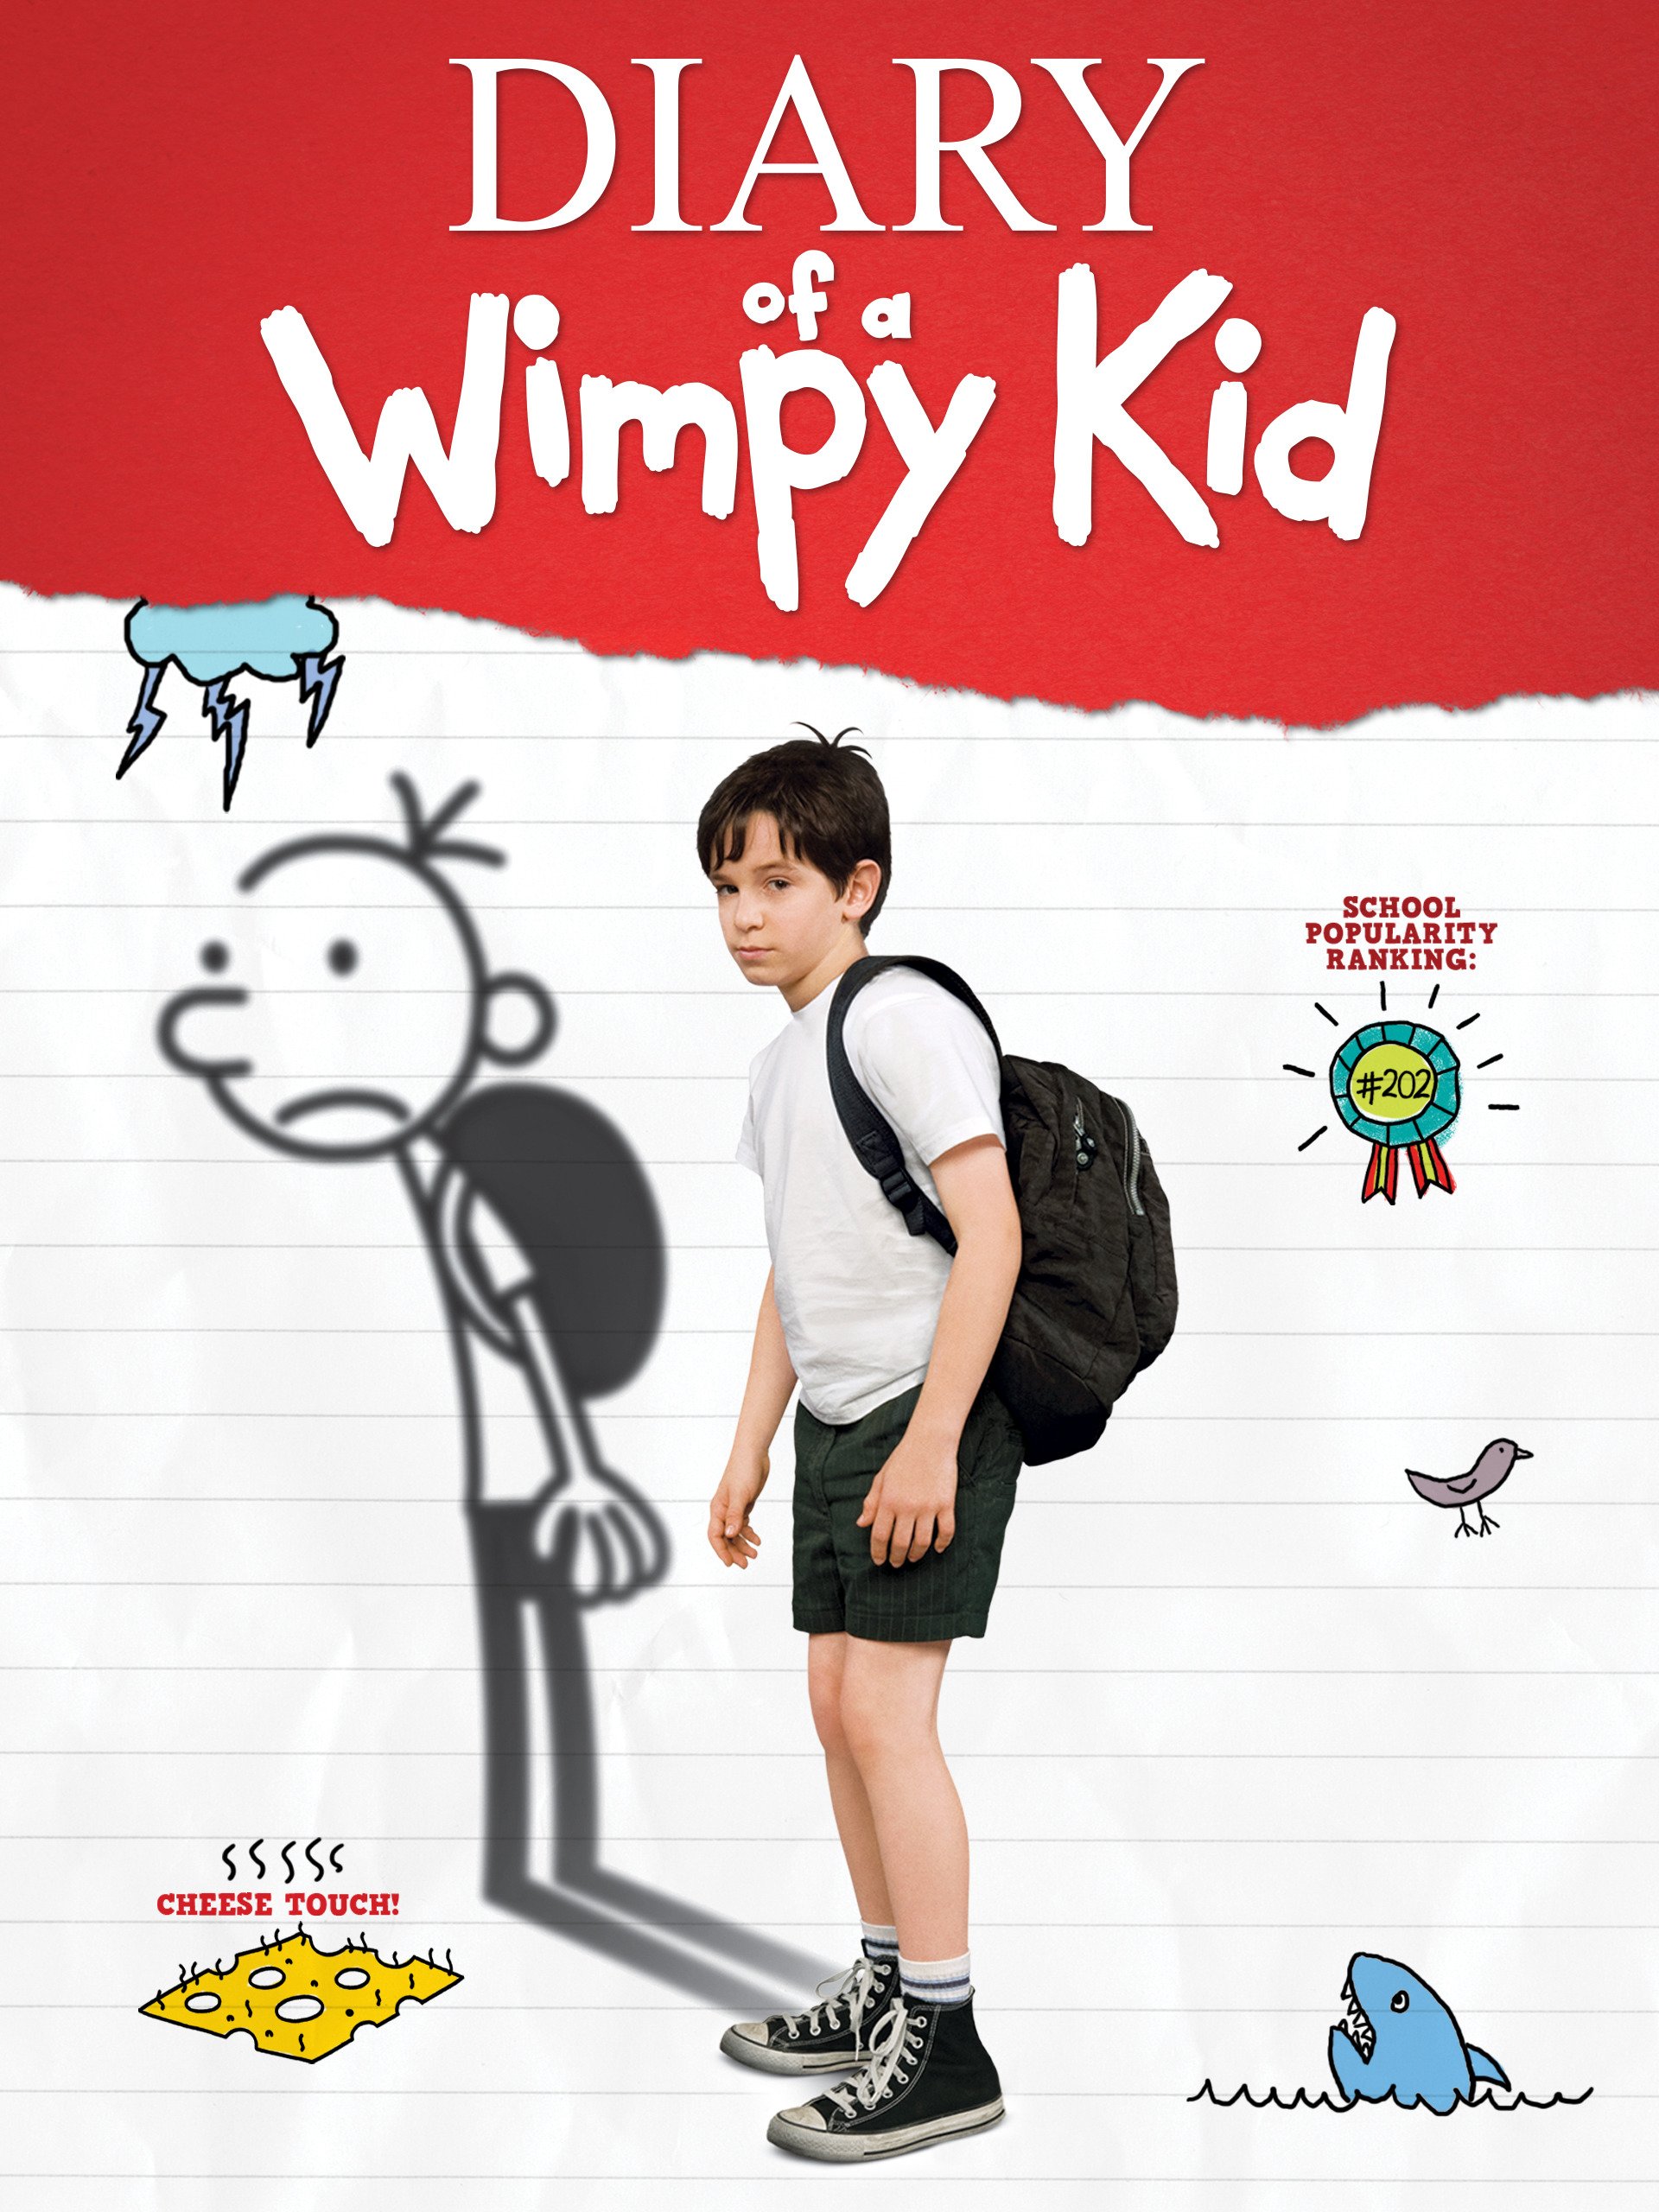 Great back to school movies - Diary of a Wimpy Kid